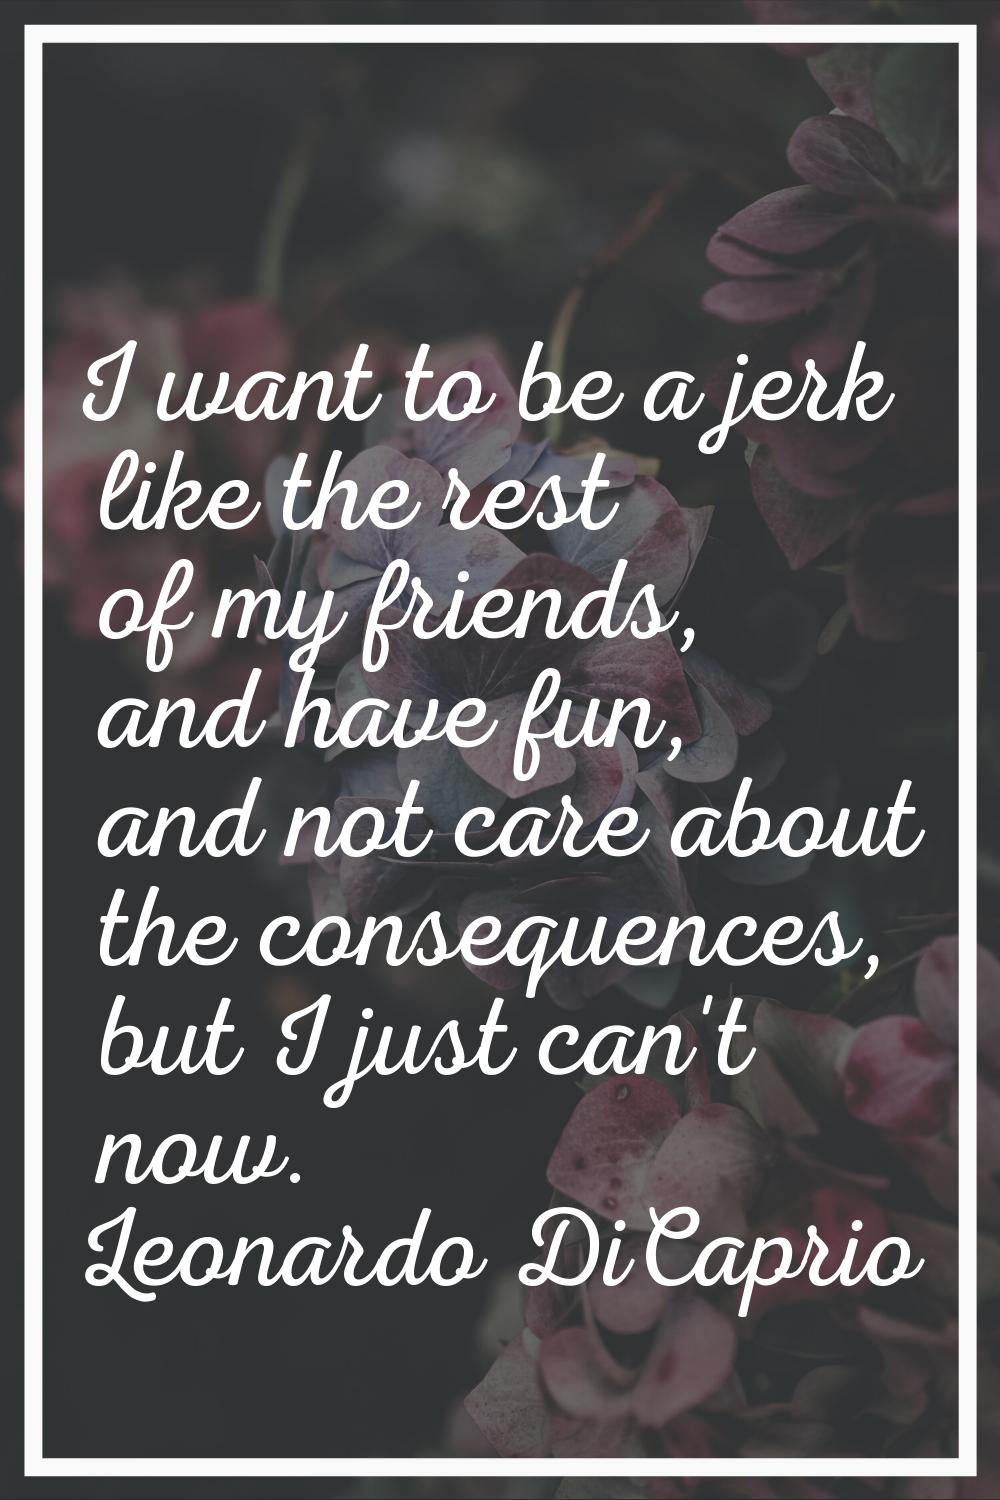 I want to be a jerk like the rest of my friends, and have fun, and not care about the consequences,